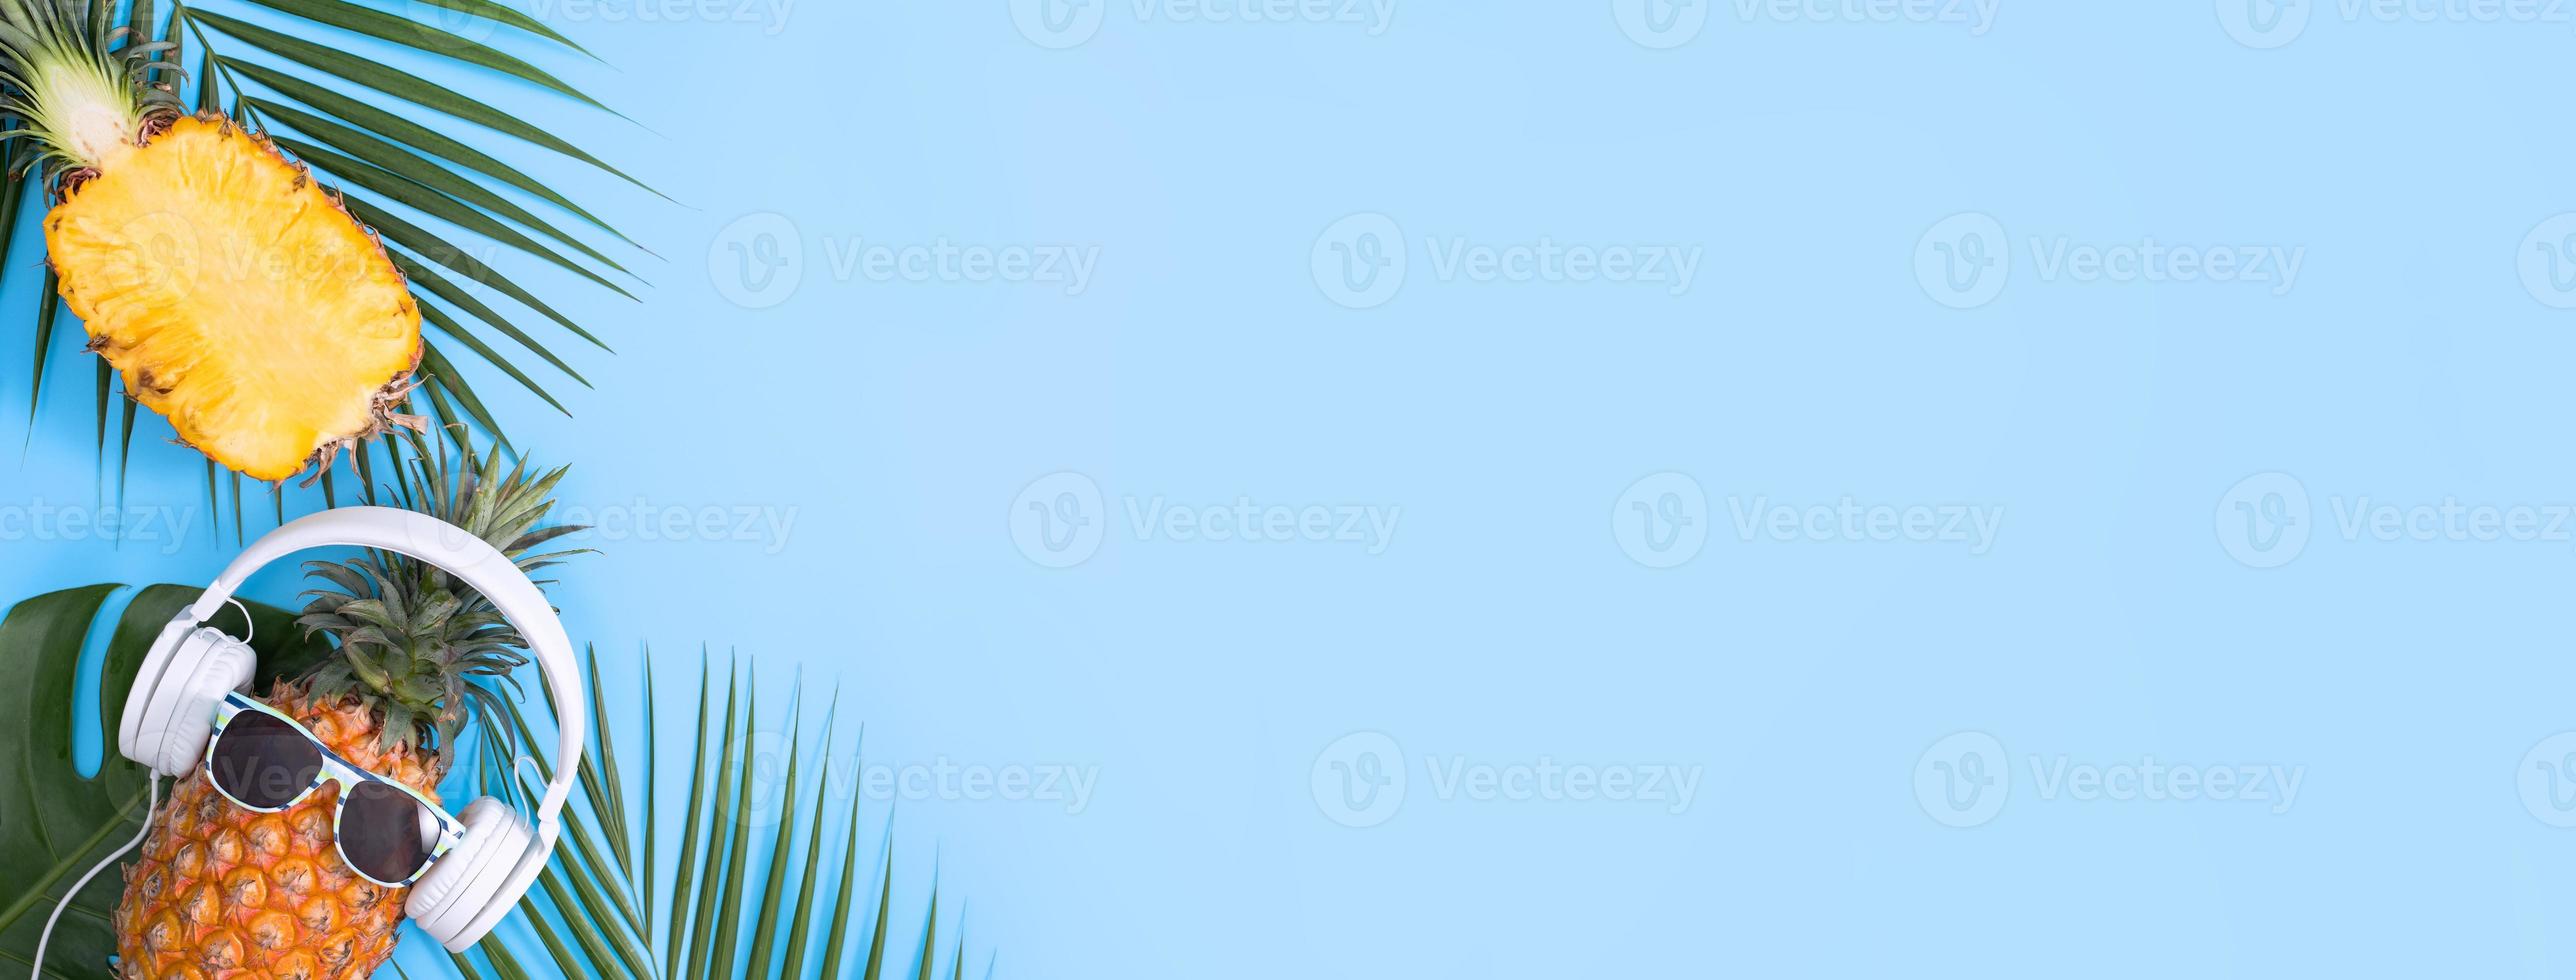 Funny pineapple wearing white headphone, concept of listening music, isolated on colored background with tropical palm leaves, top view, flat lay design. photo